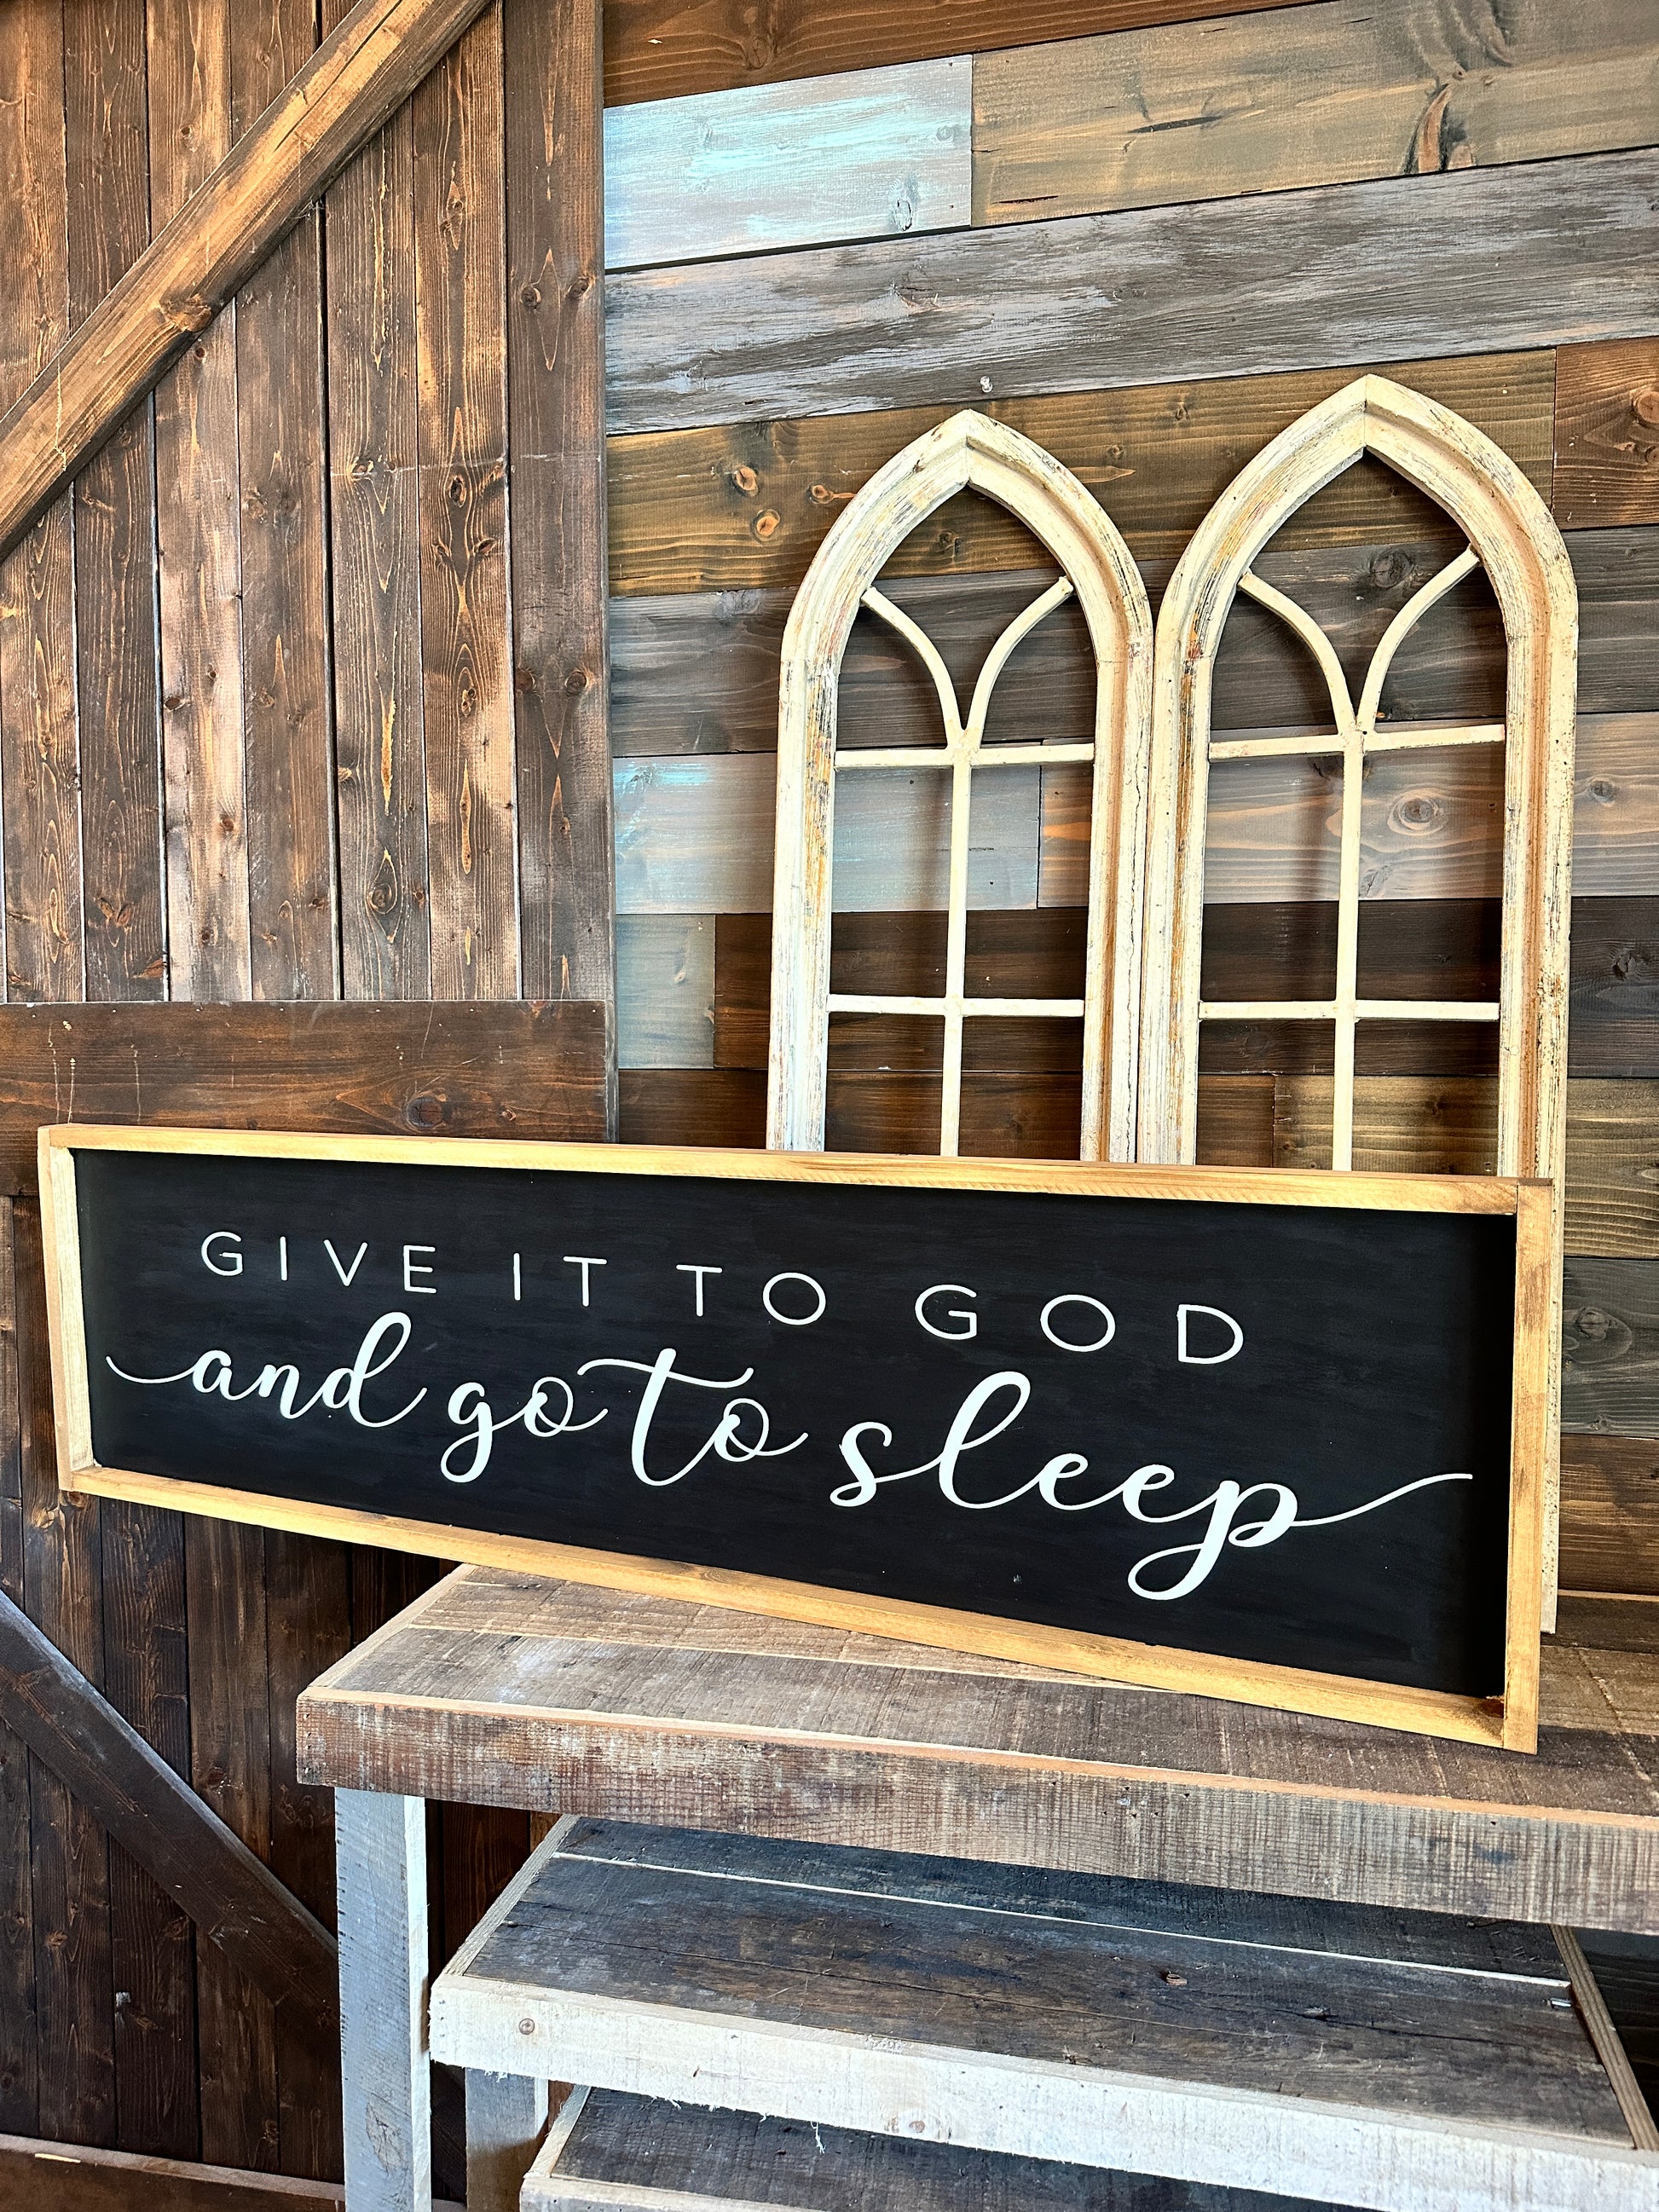 Give it to God and Go to sleep: Plank Design - Paisley Grace Makery